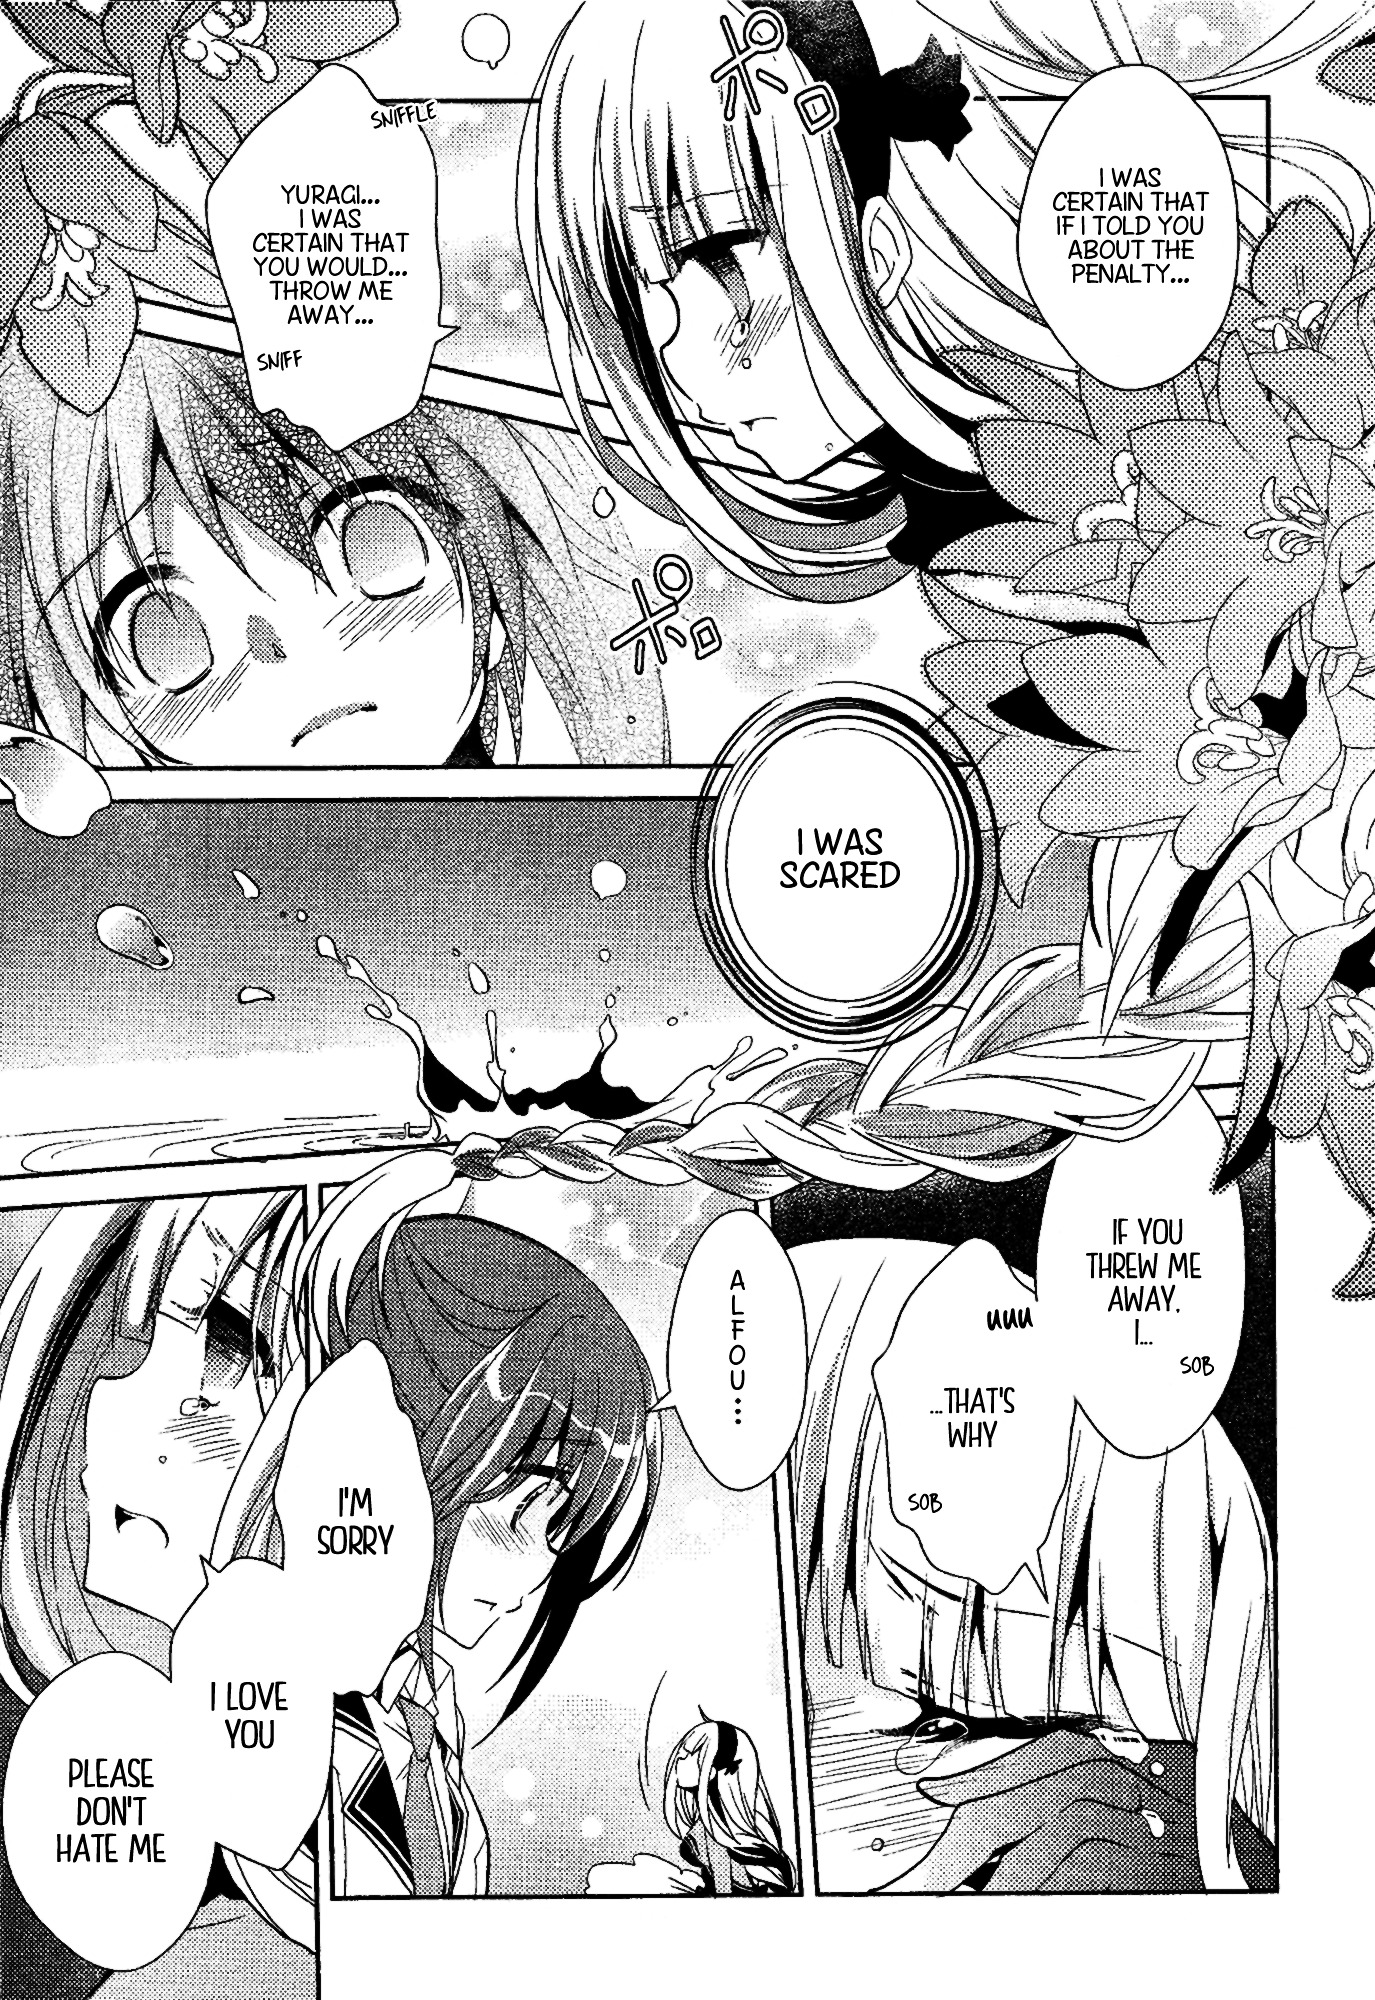 Selector Infected Wixoss - Re/verse - Chapter 3 #16